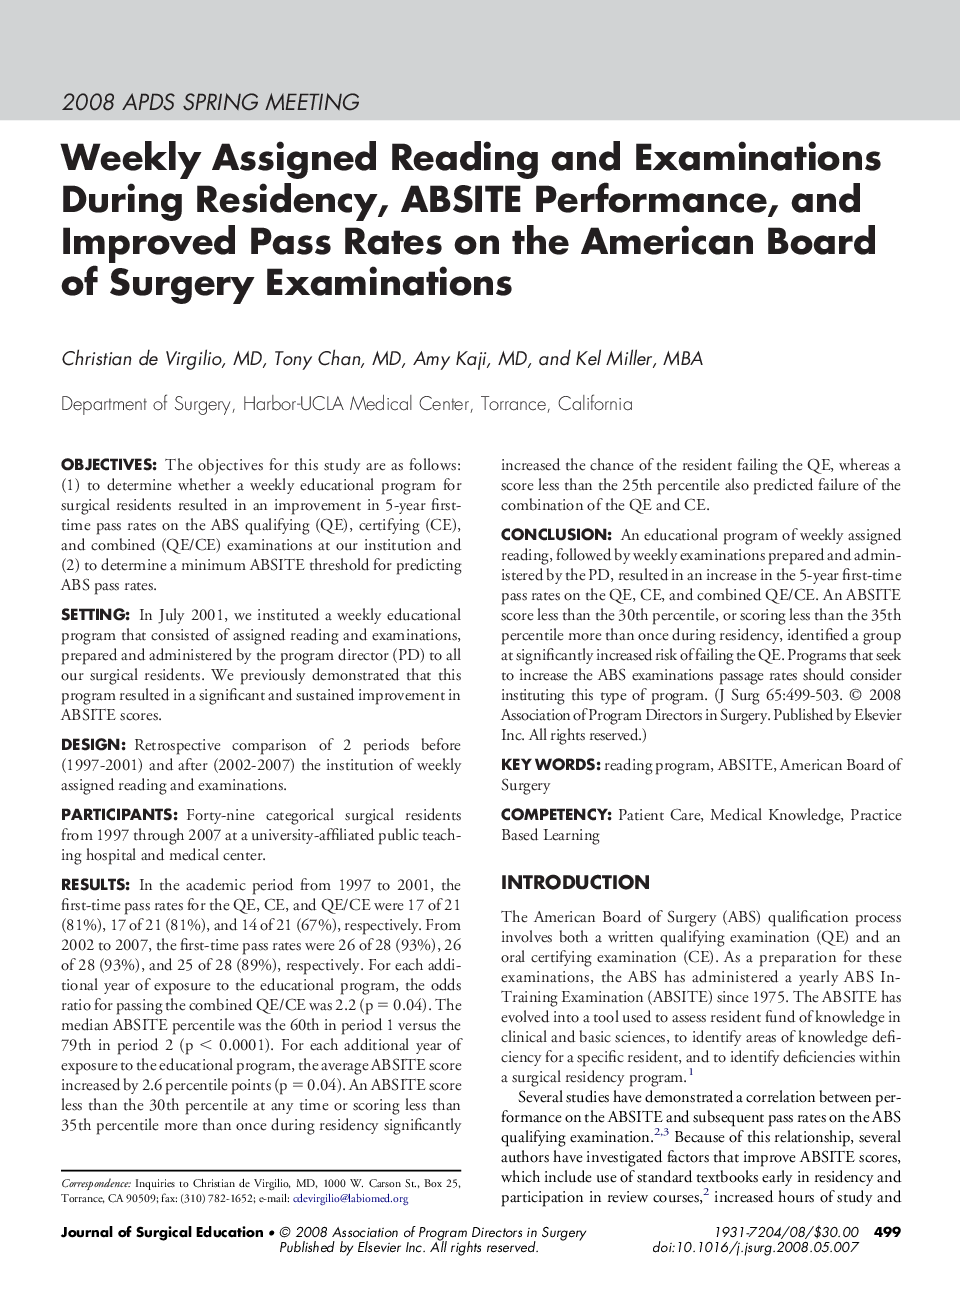 Weekly Assigned Reading and Examinations During Residency, ABSITE Performance, and Improved Pass Rates on the American Board of Surgery Examinations